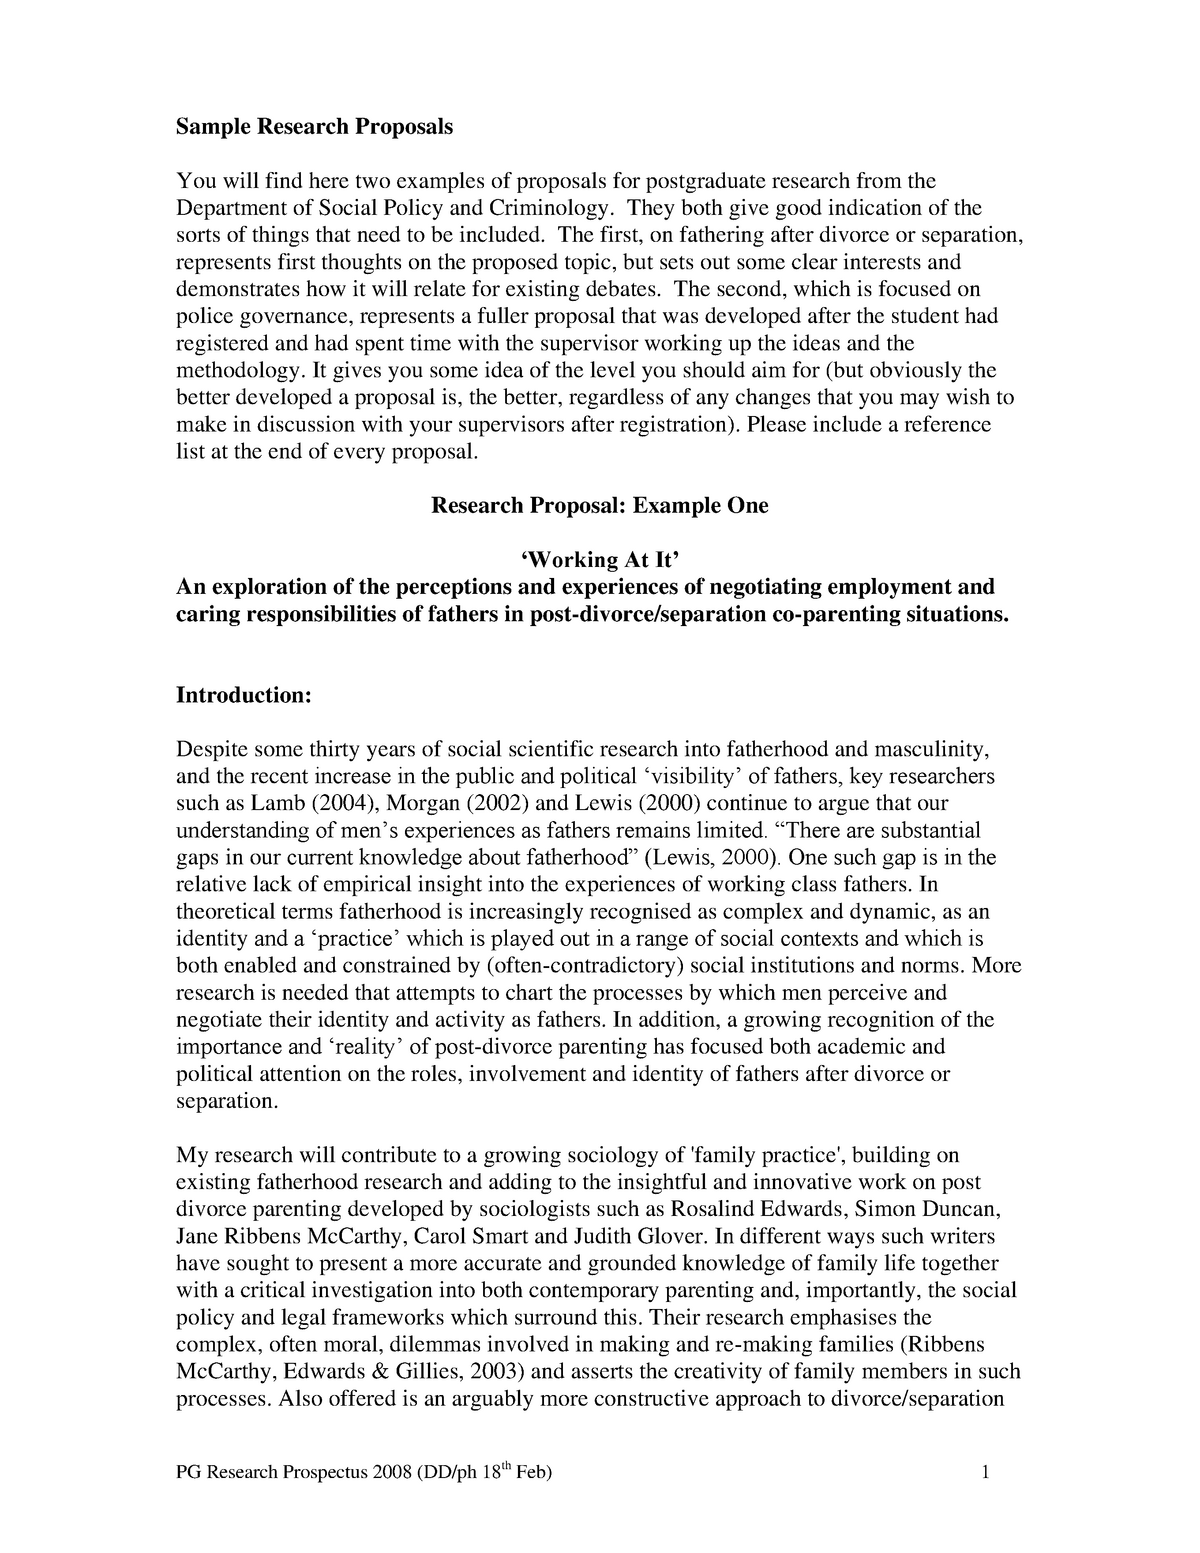 examples of research proposals in psychology